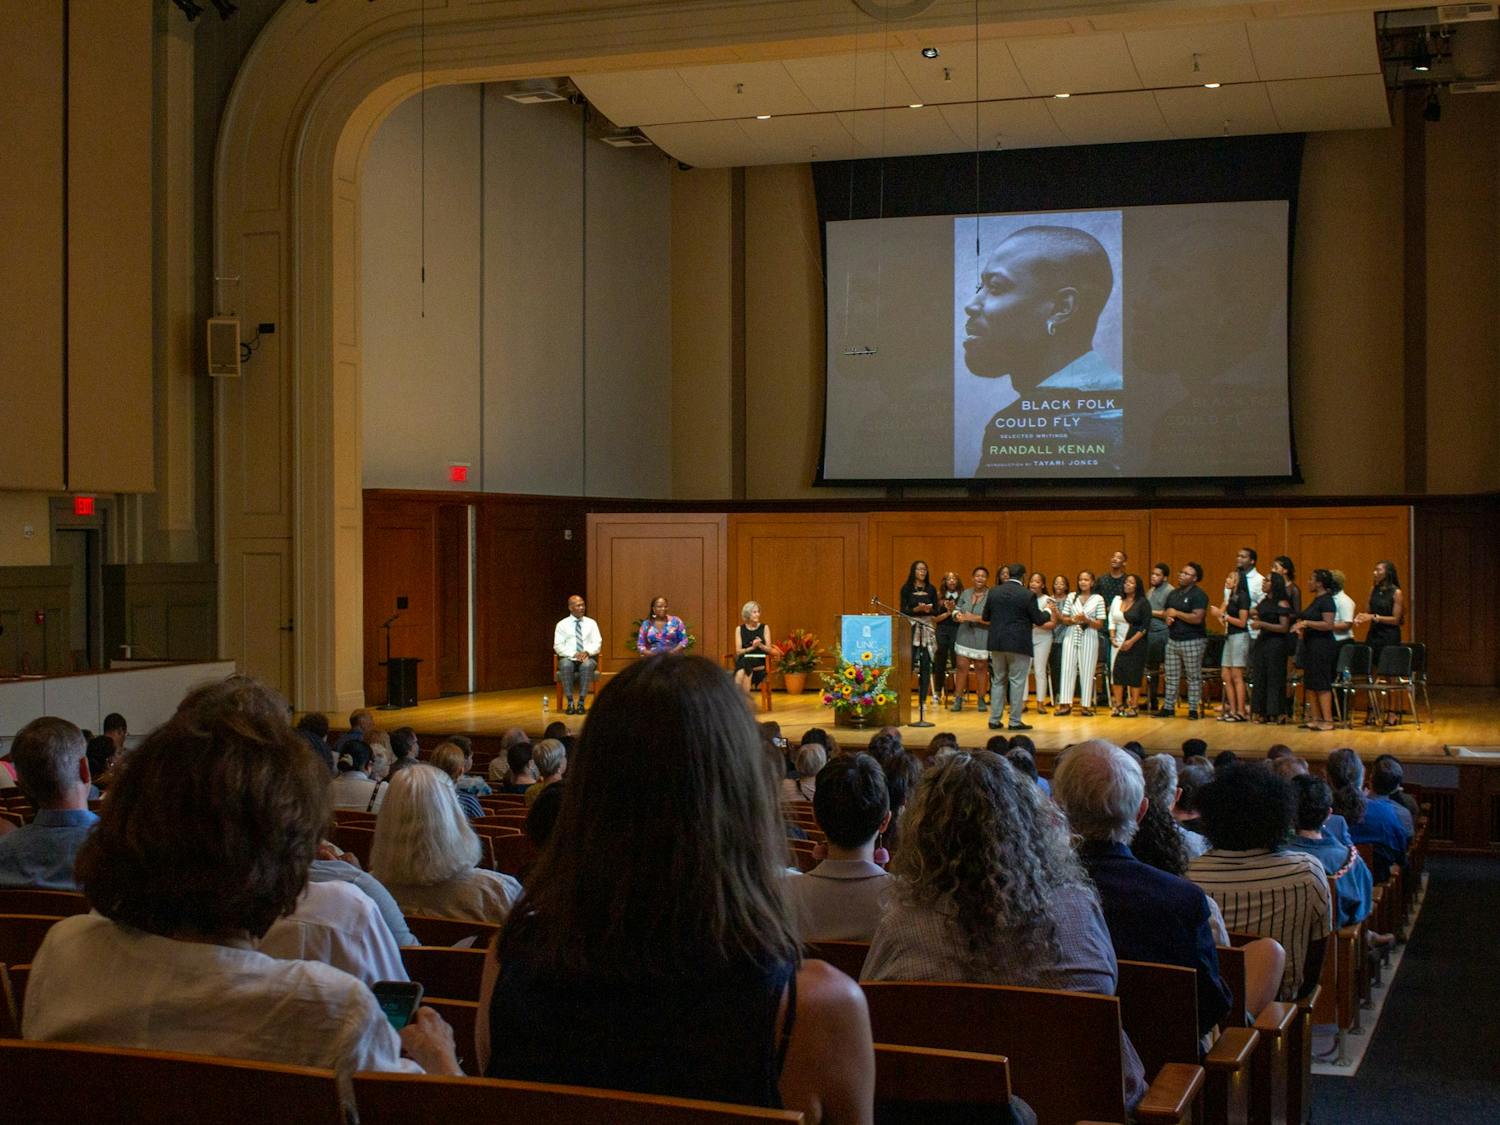 UNC Voices of Praise Gospel Choir performs "Everybody Clap Your Hands" at the Black Folk Could Fly event in Hill Hall on Sunday, Sept. 11, 2022.